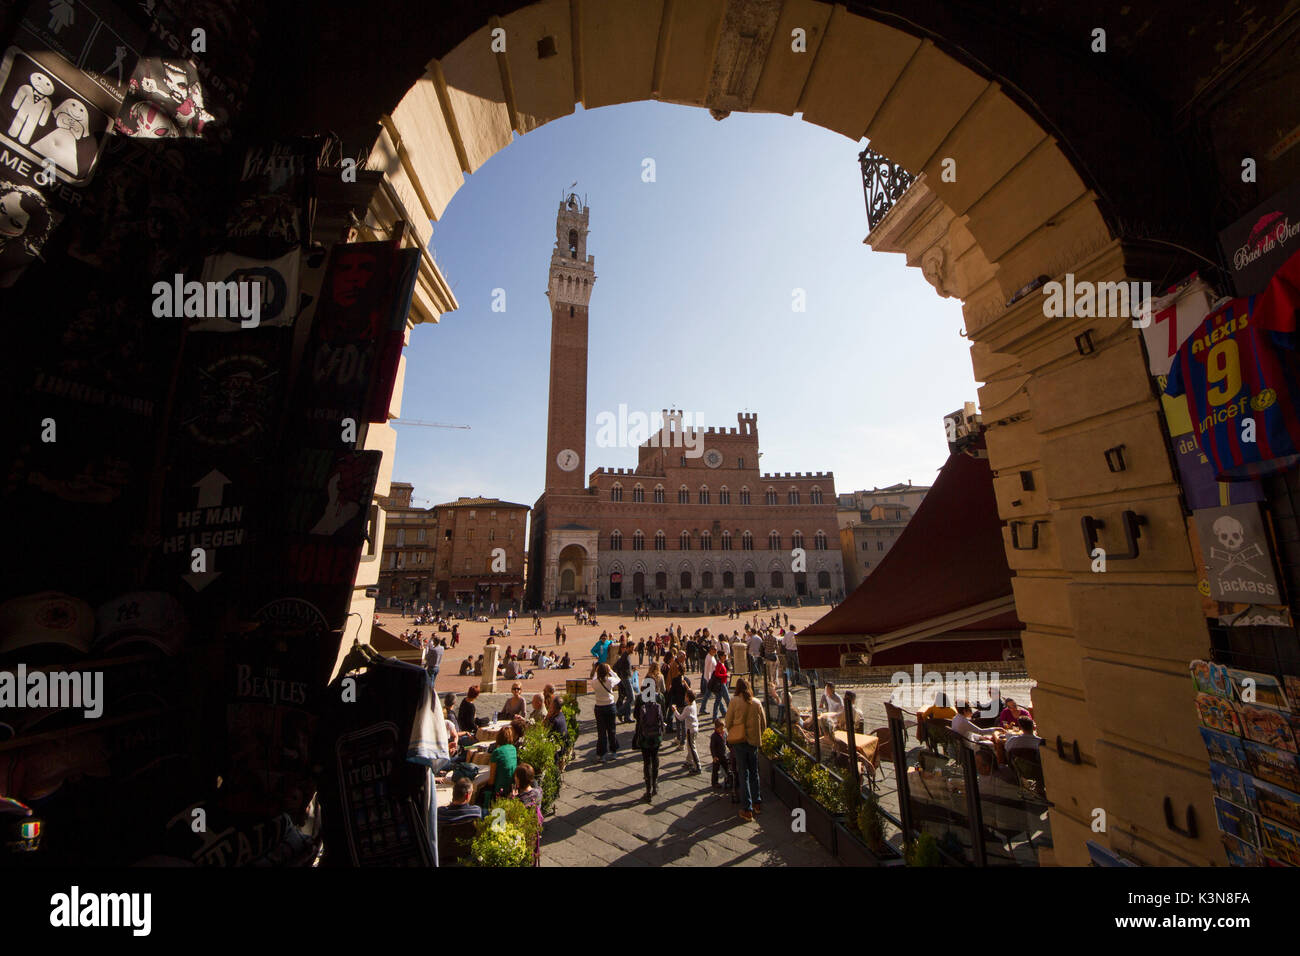 The Public Palace and the Torre del Mangia viewed from one of the entrances of the Piazza del Campo, Siena, Tuscany, Italy Stock Photo